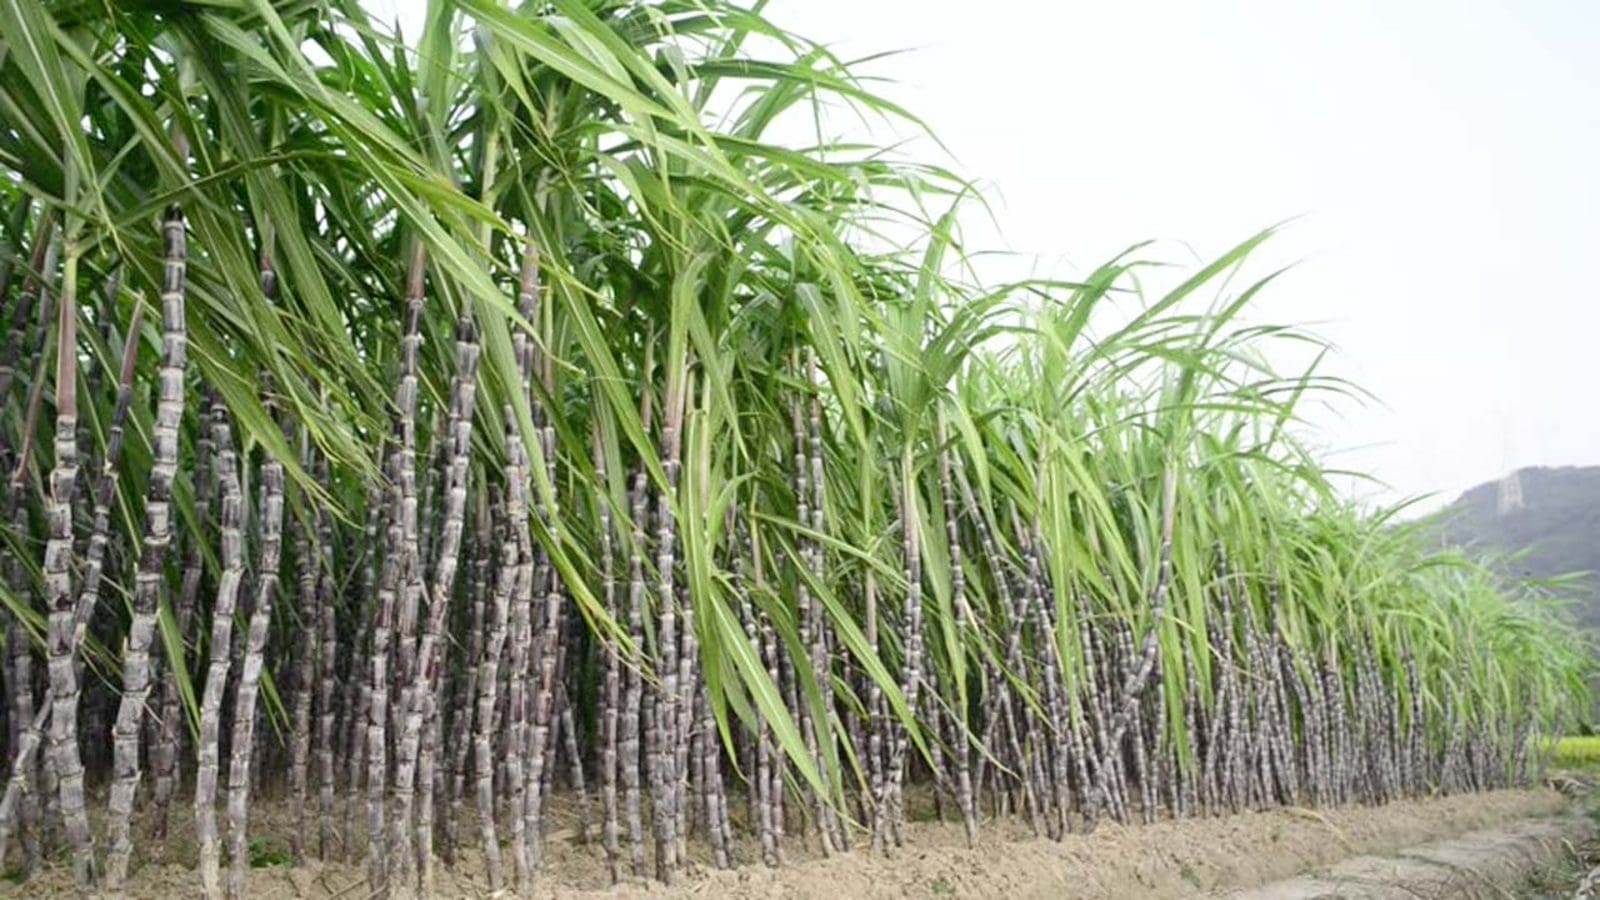 Uncertain future for South African cane growers as Unilateral Sugar Tax increase looms